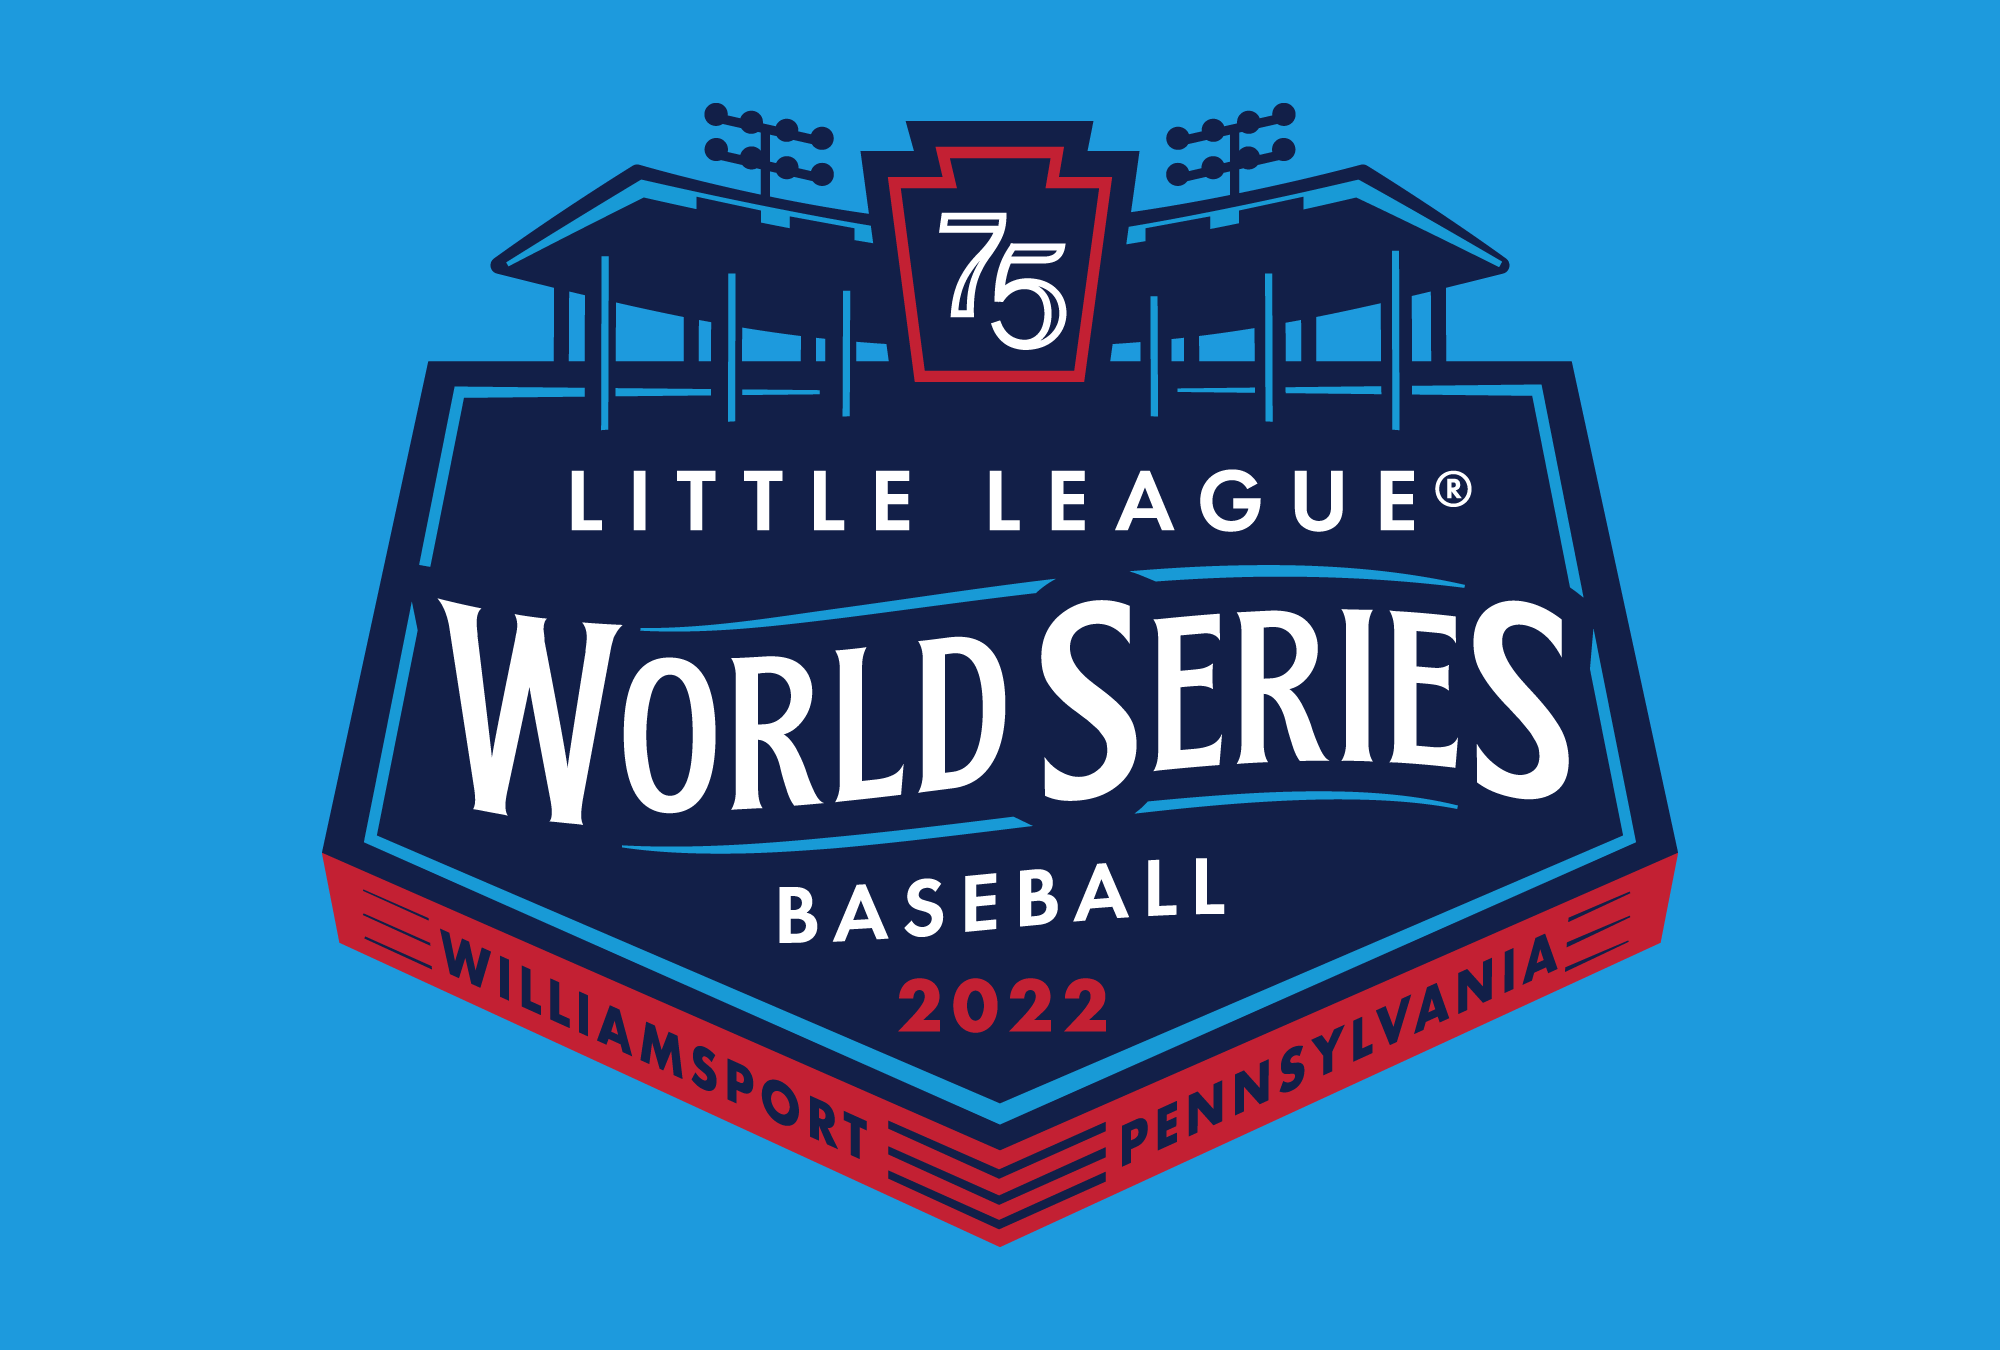 How to Watch Little League Baseball World Series Regionals on August 7 Stream, Start Times, Preview